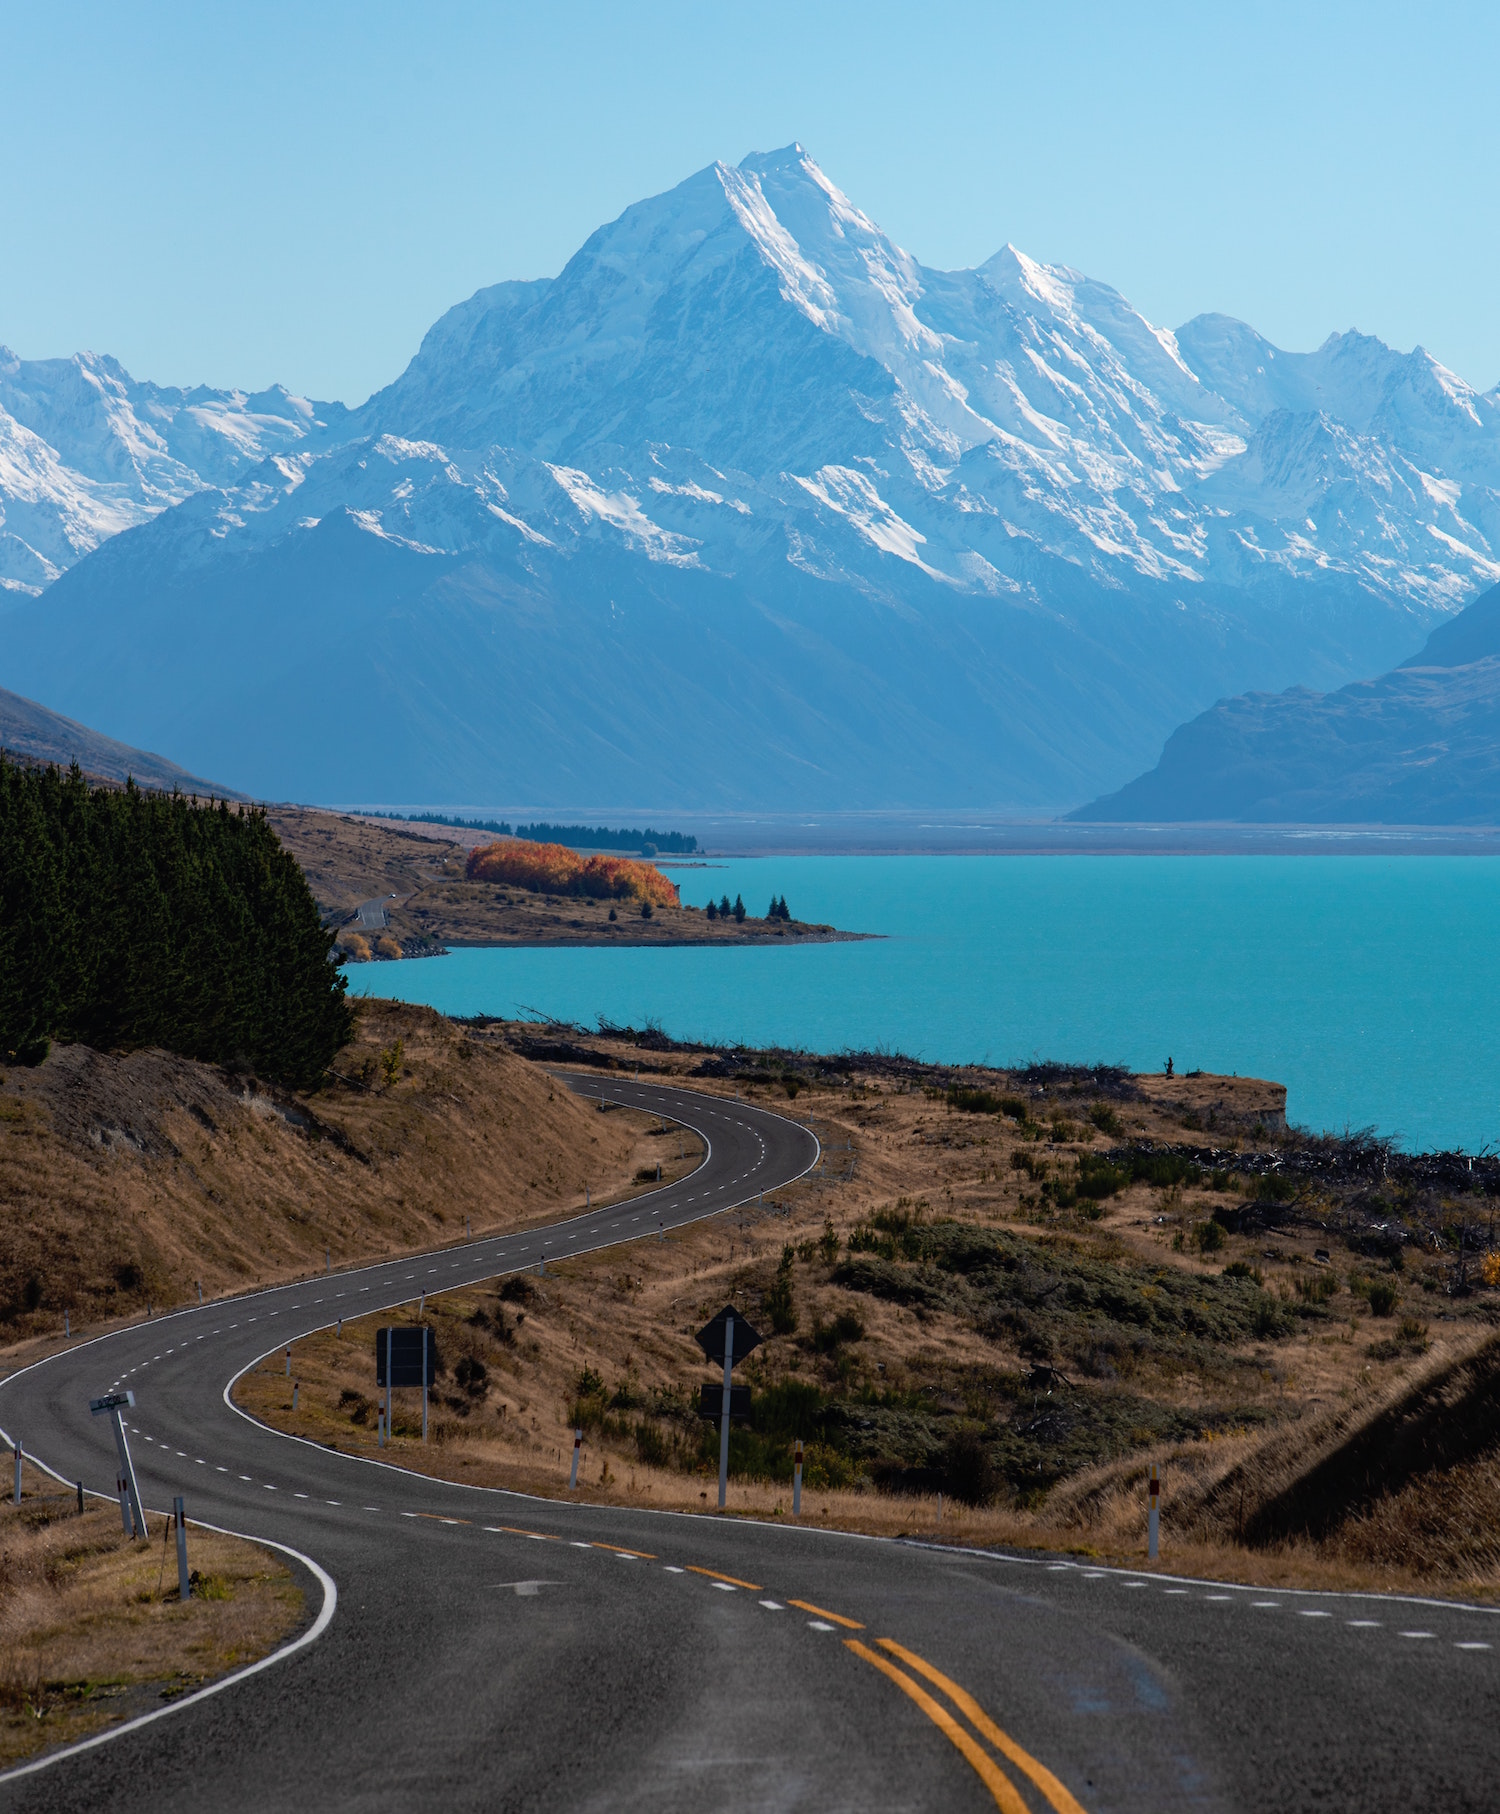 A road snakes it way down to Lake Pukaki with snowcapped mountains in the distance.